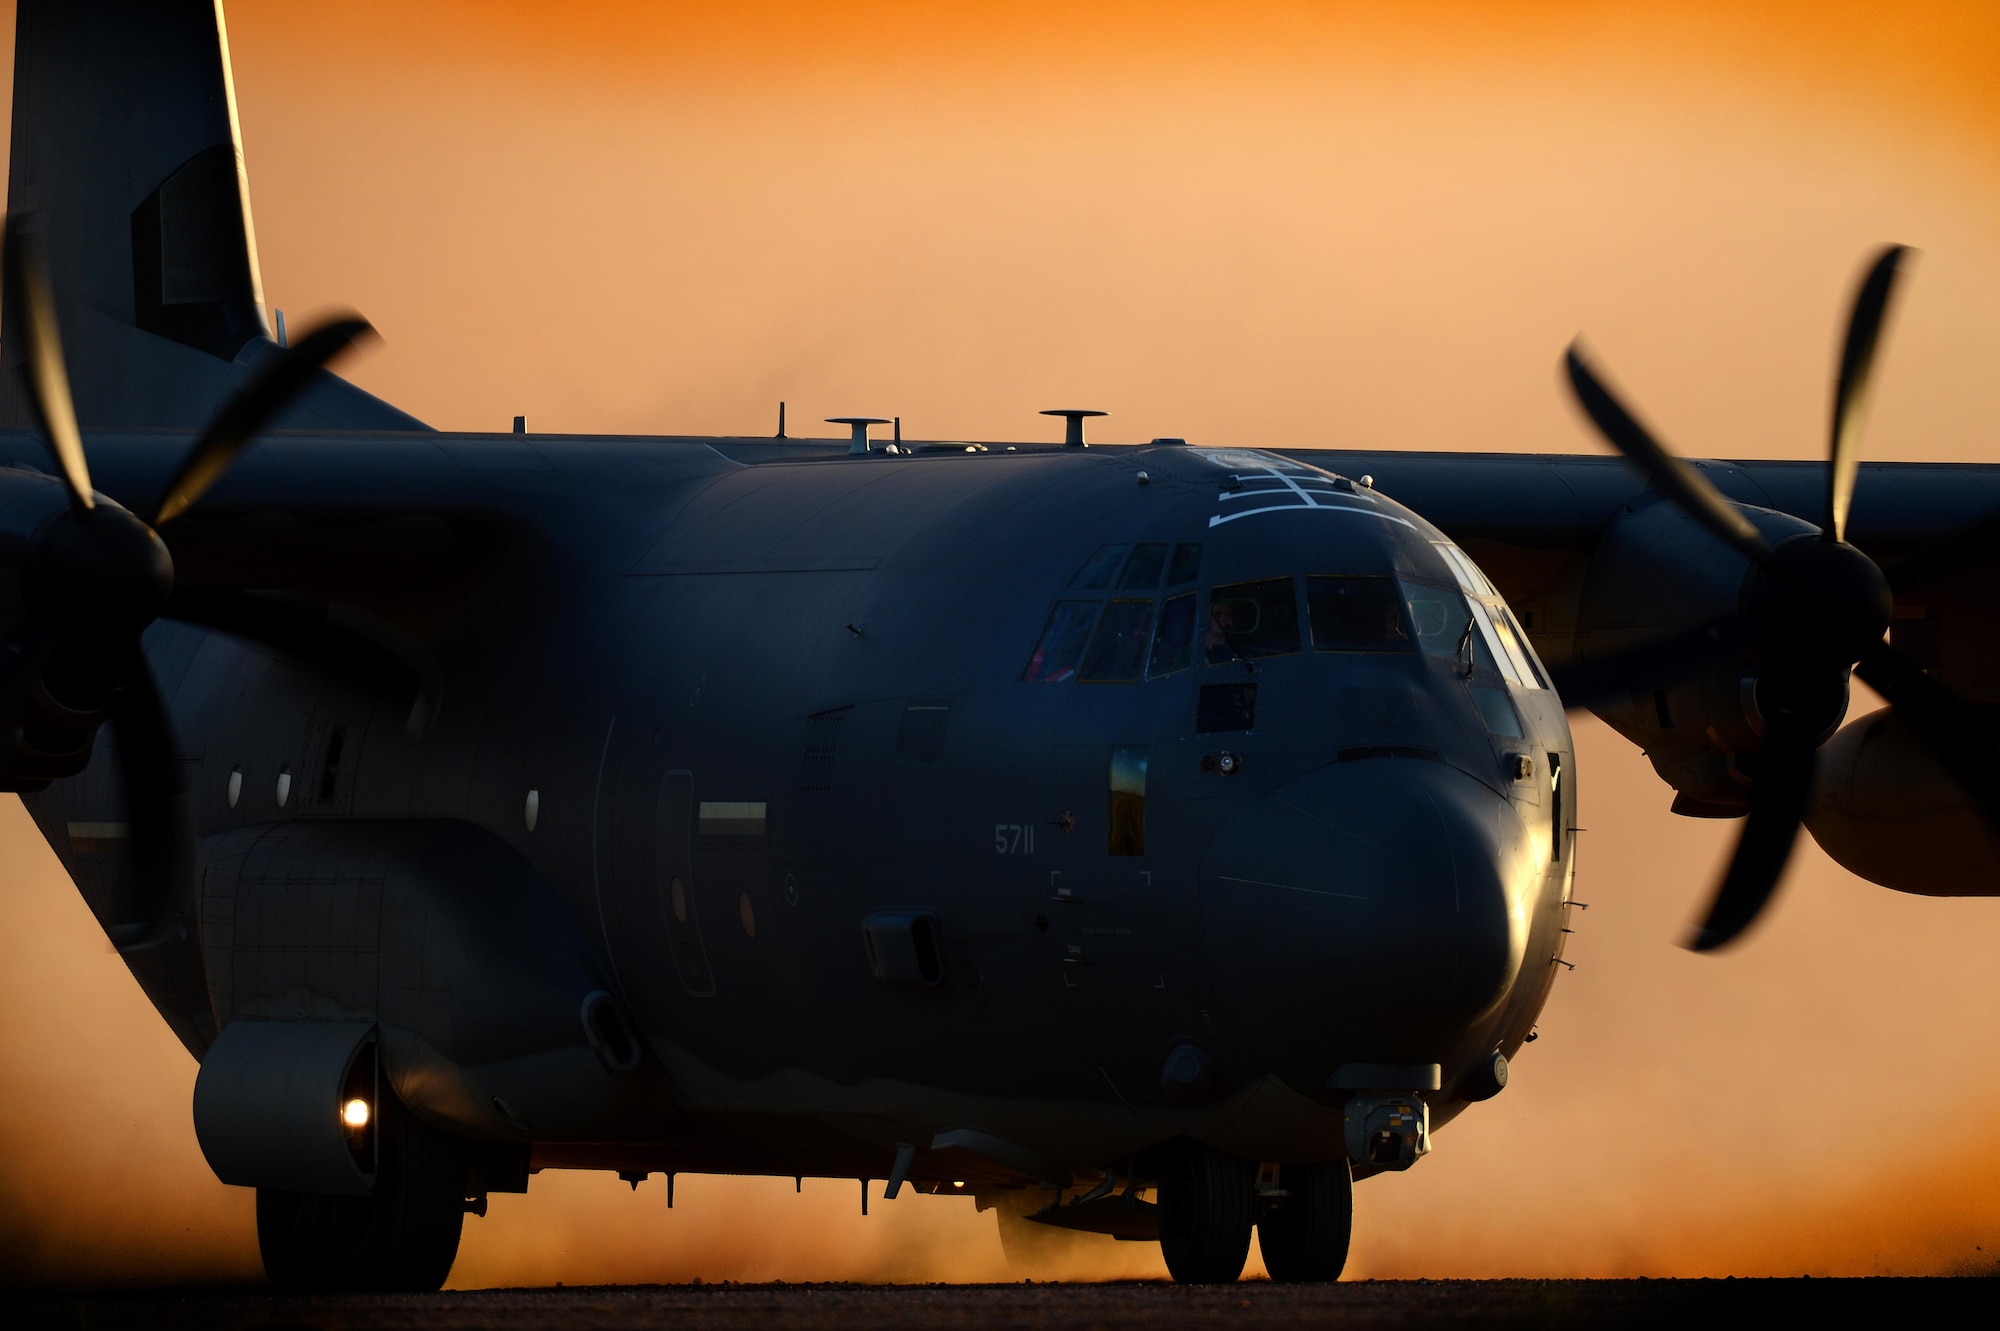 An MC-130J Commando II from the 9th Special Operations Squadron taxis for departure from Red Horse landing zone in support of exercise Emerald Warrior April 29, 2015, at Melrose Air Force Range, N.M. Emerald Warrior is the Defense Department's only irregular warfare exercise, allowing joint and combined partners to train together and prepare for real-world contingency operations. (U.S. Air Force photo/Staff Sgt. Matthew Plew)